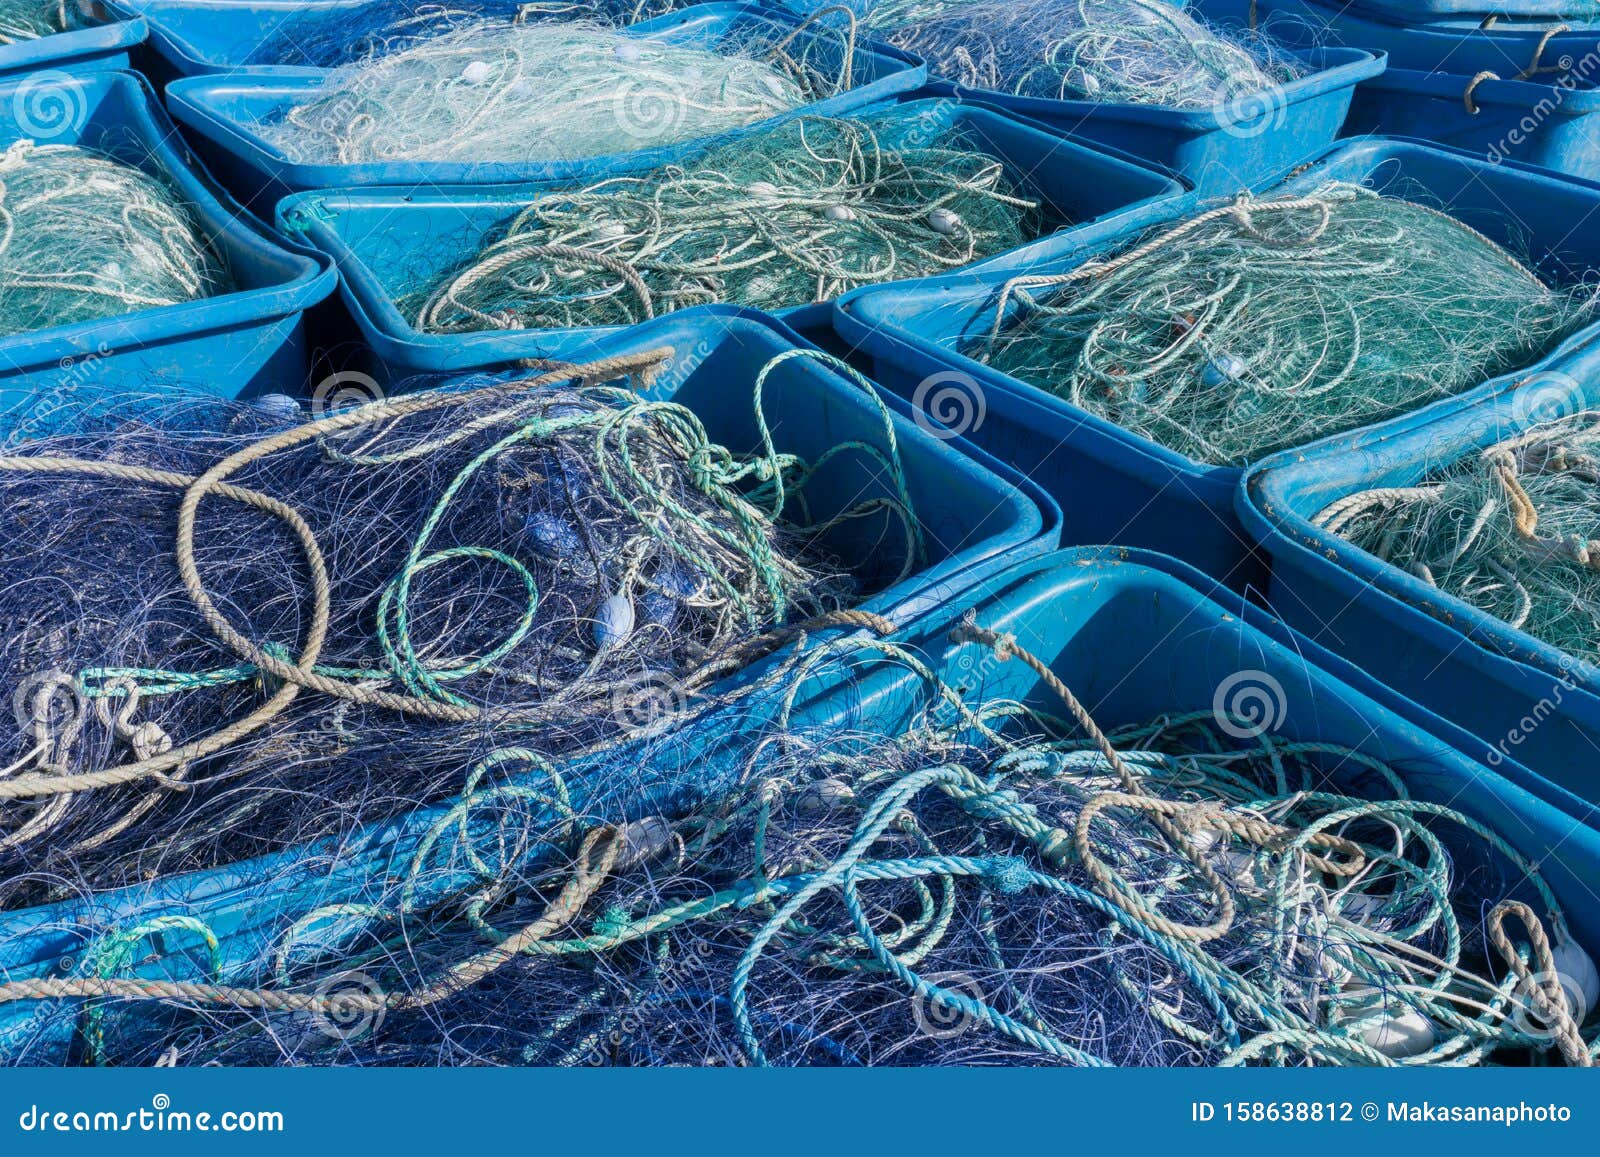 https://thumbs.dreamstime.com/z/large-plastic-tubs-filled-industrial-size-fishing-trawling-nets-used-offshore-industry-detail-view-158638812.jpg